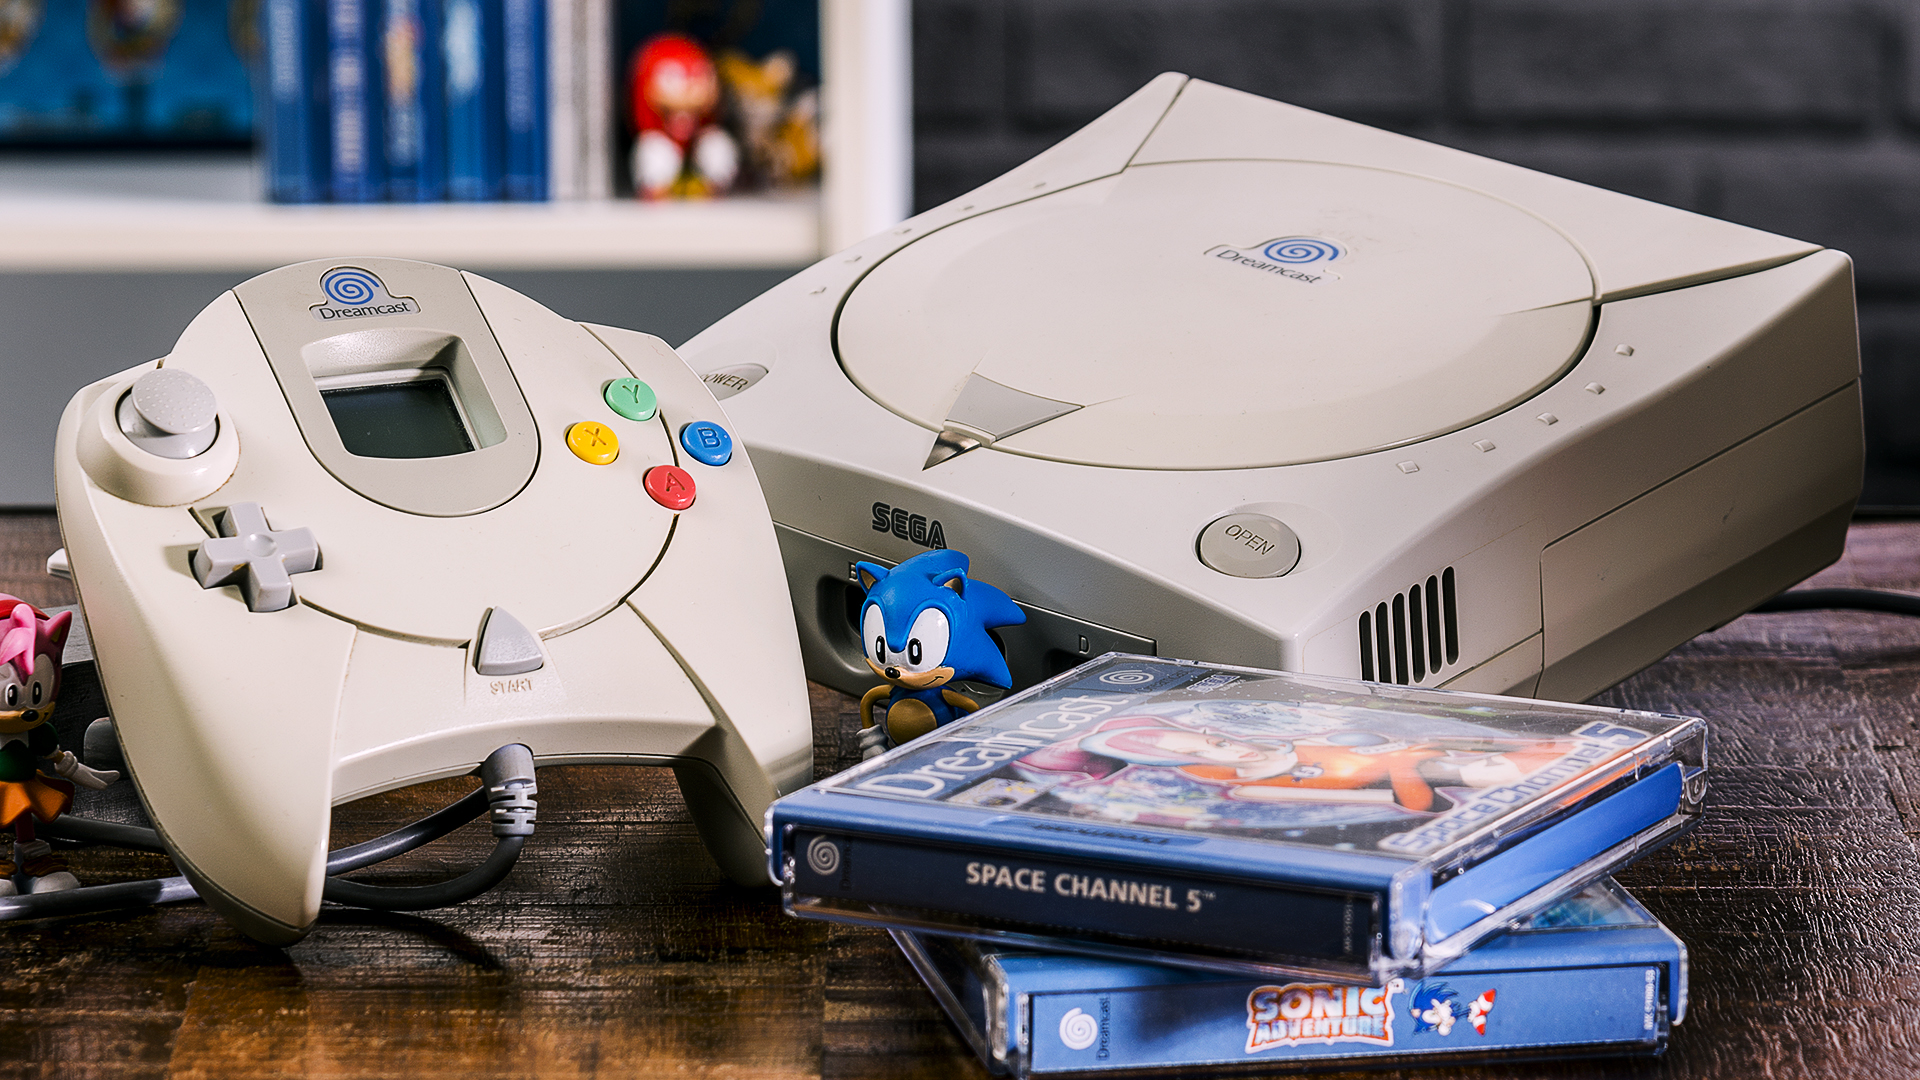 5 Must-Play Retro Games Online